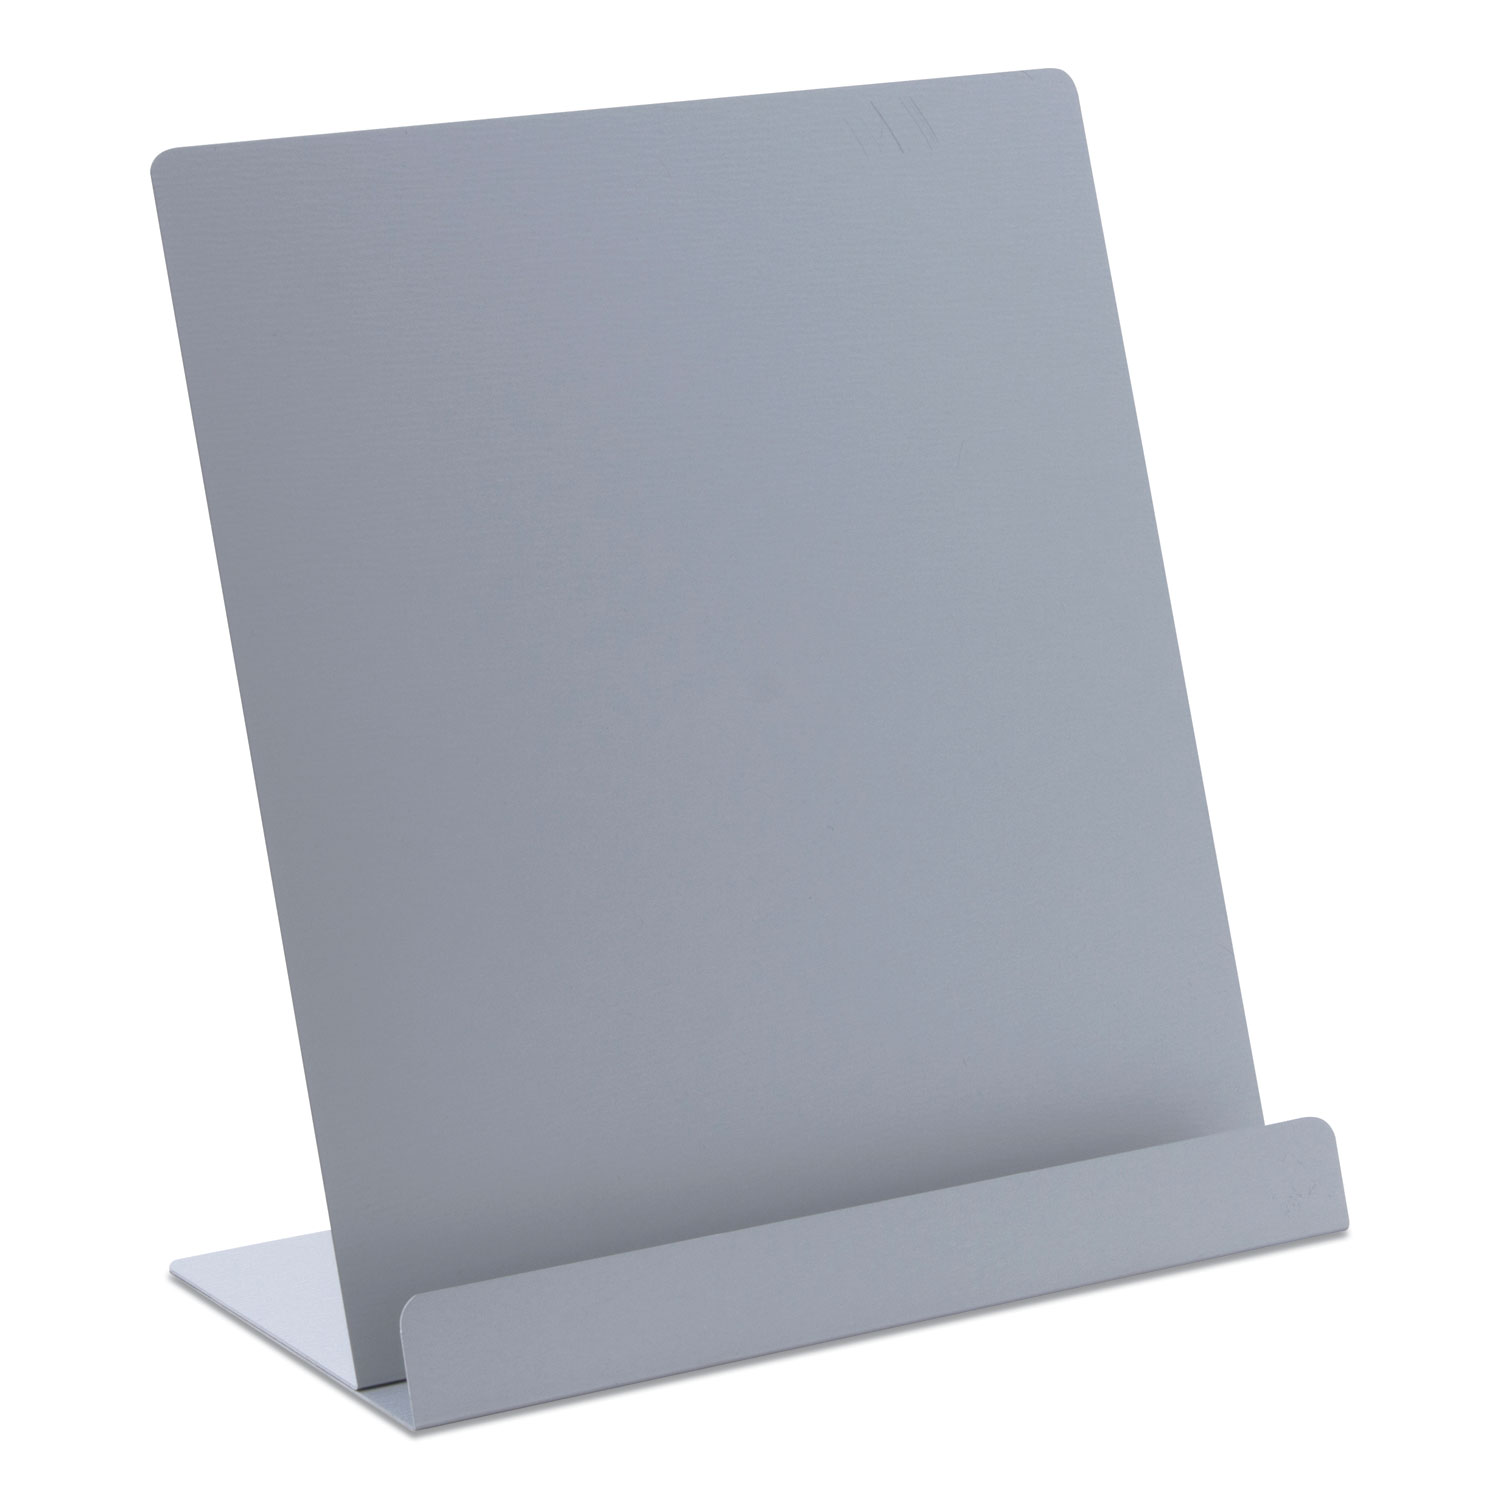  Saunders 00887 Tablet Stand or iPads and Tablets, Aluminum, Silver (SAU00887) 